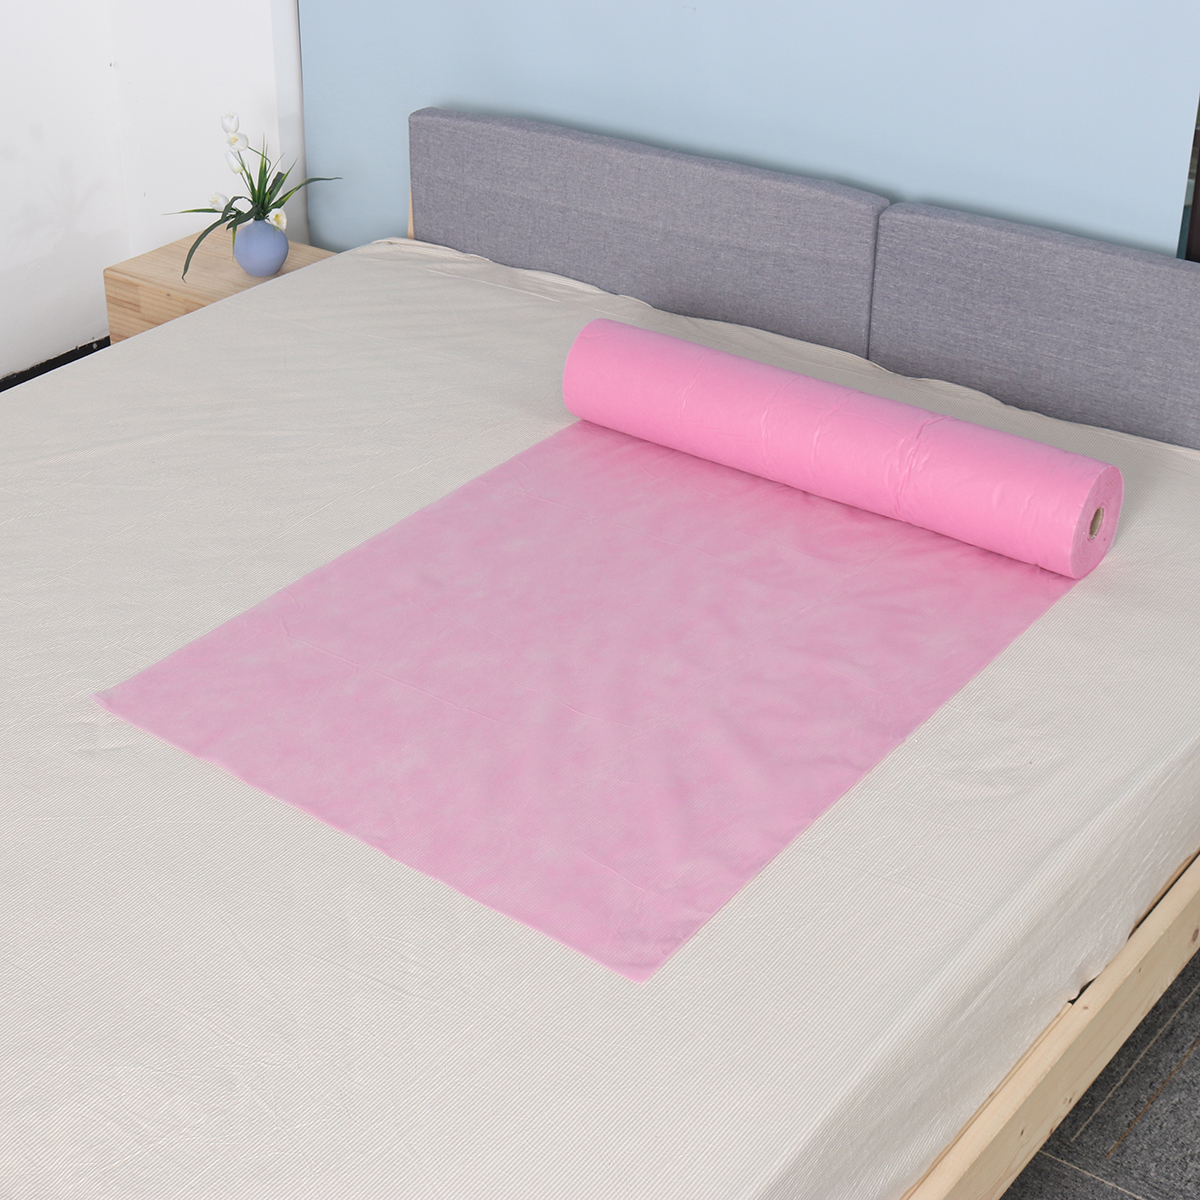 180x80cm-50PcsRoll-Disposable-Massage-Table-Bed-Cover-Sheet-Beauty-Waxing-1737148-9